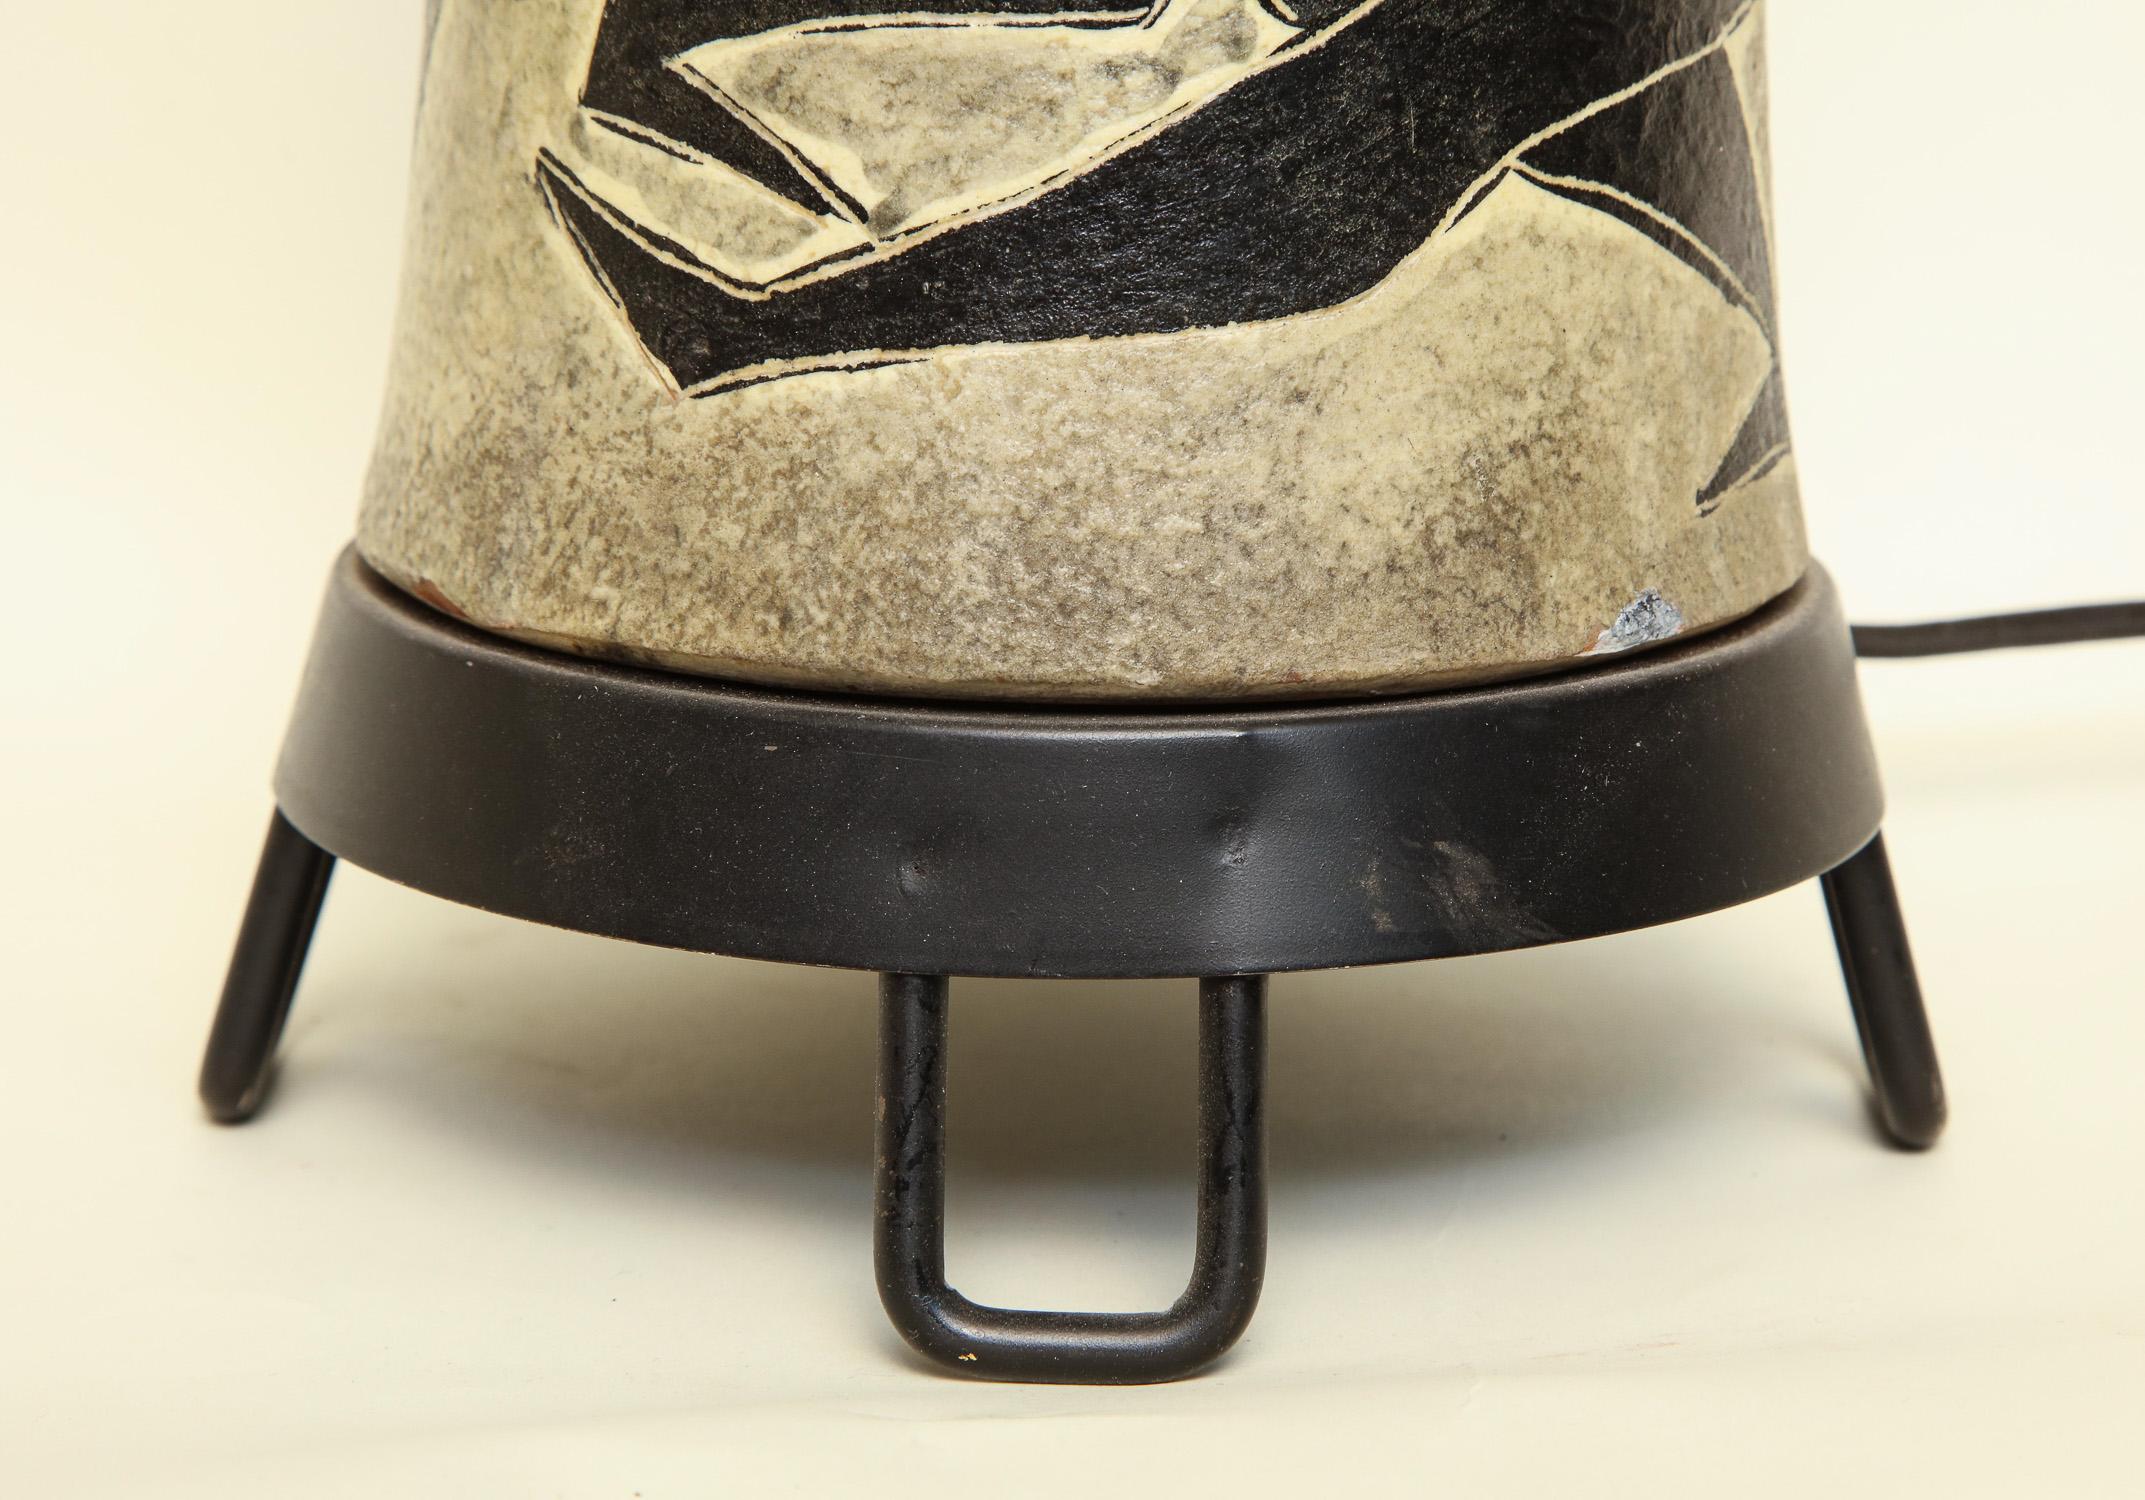 Fantoni Table Lamp Ceramic with Incised Stylized Men, Mid-Century Modern, 1950s In Good Condition For Sale In New York, NY